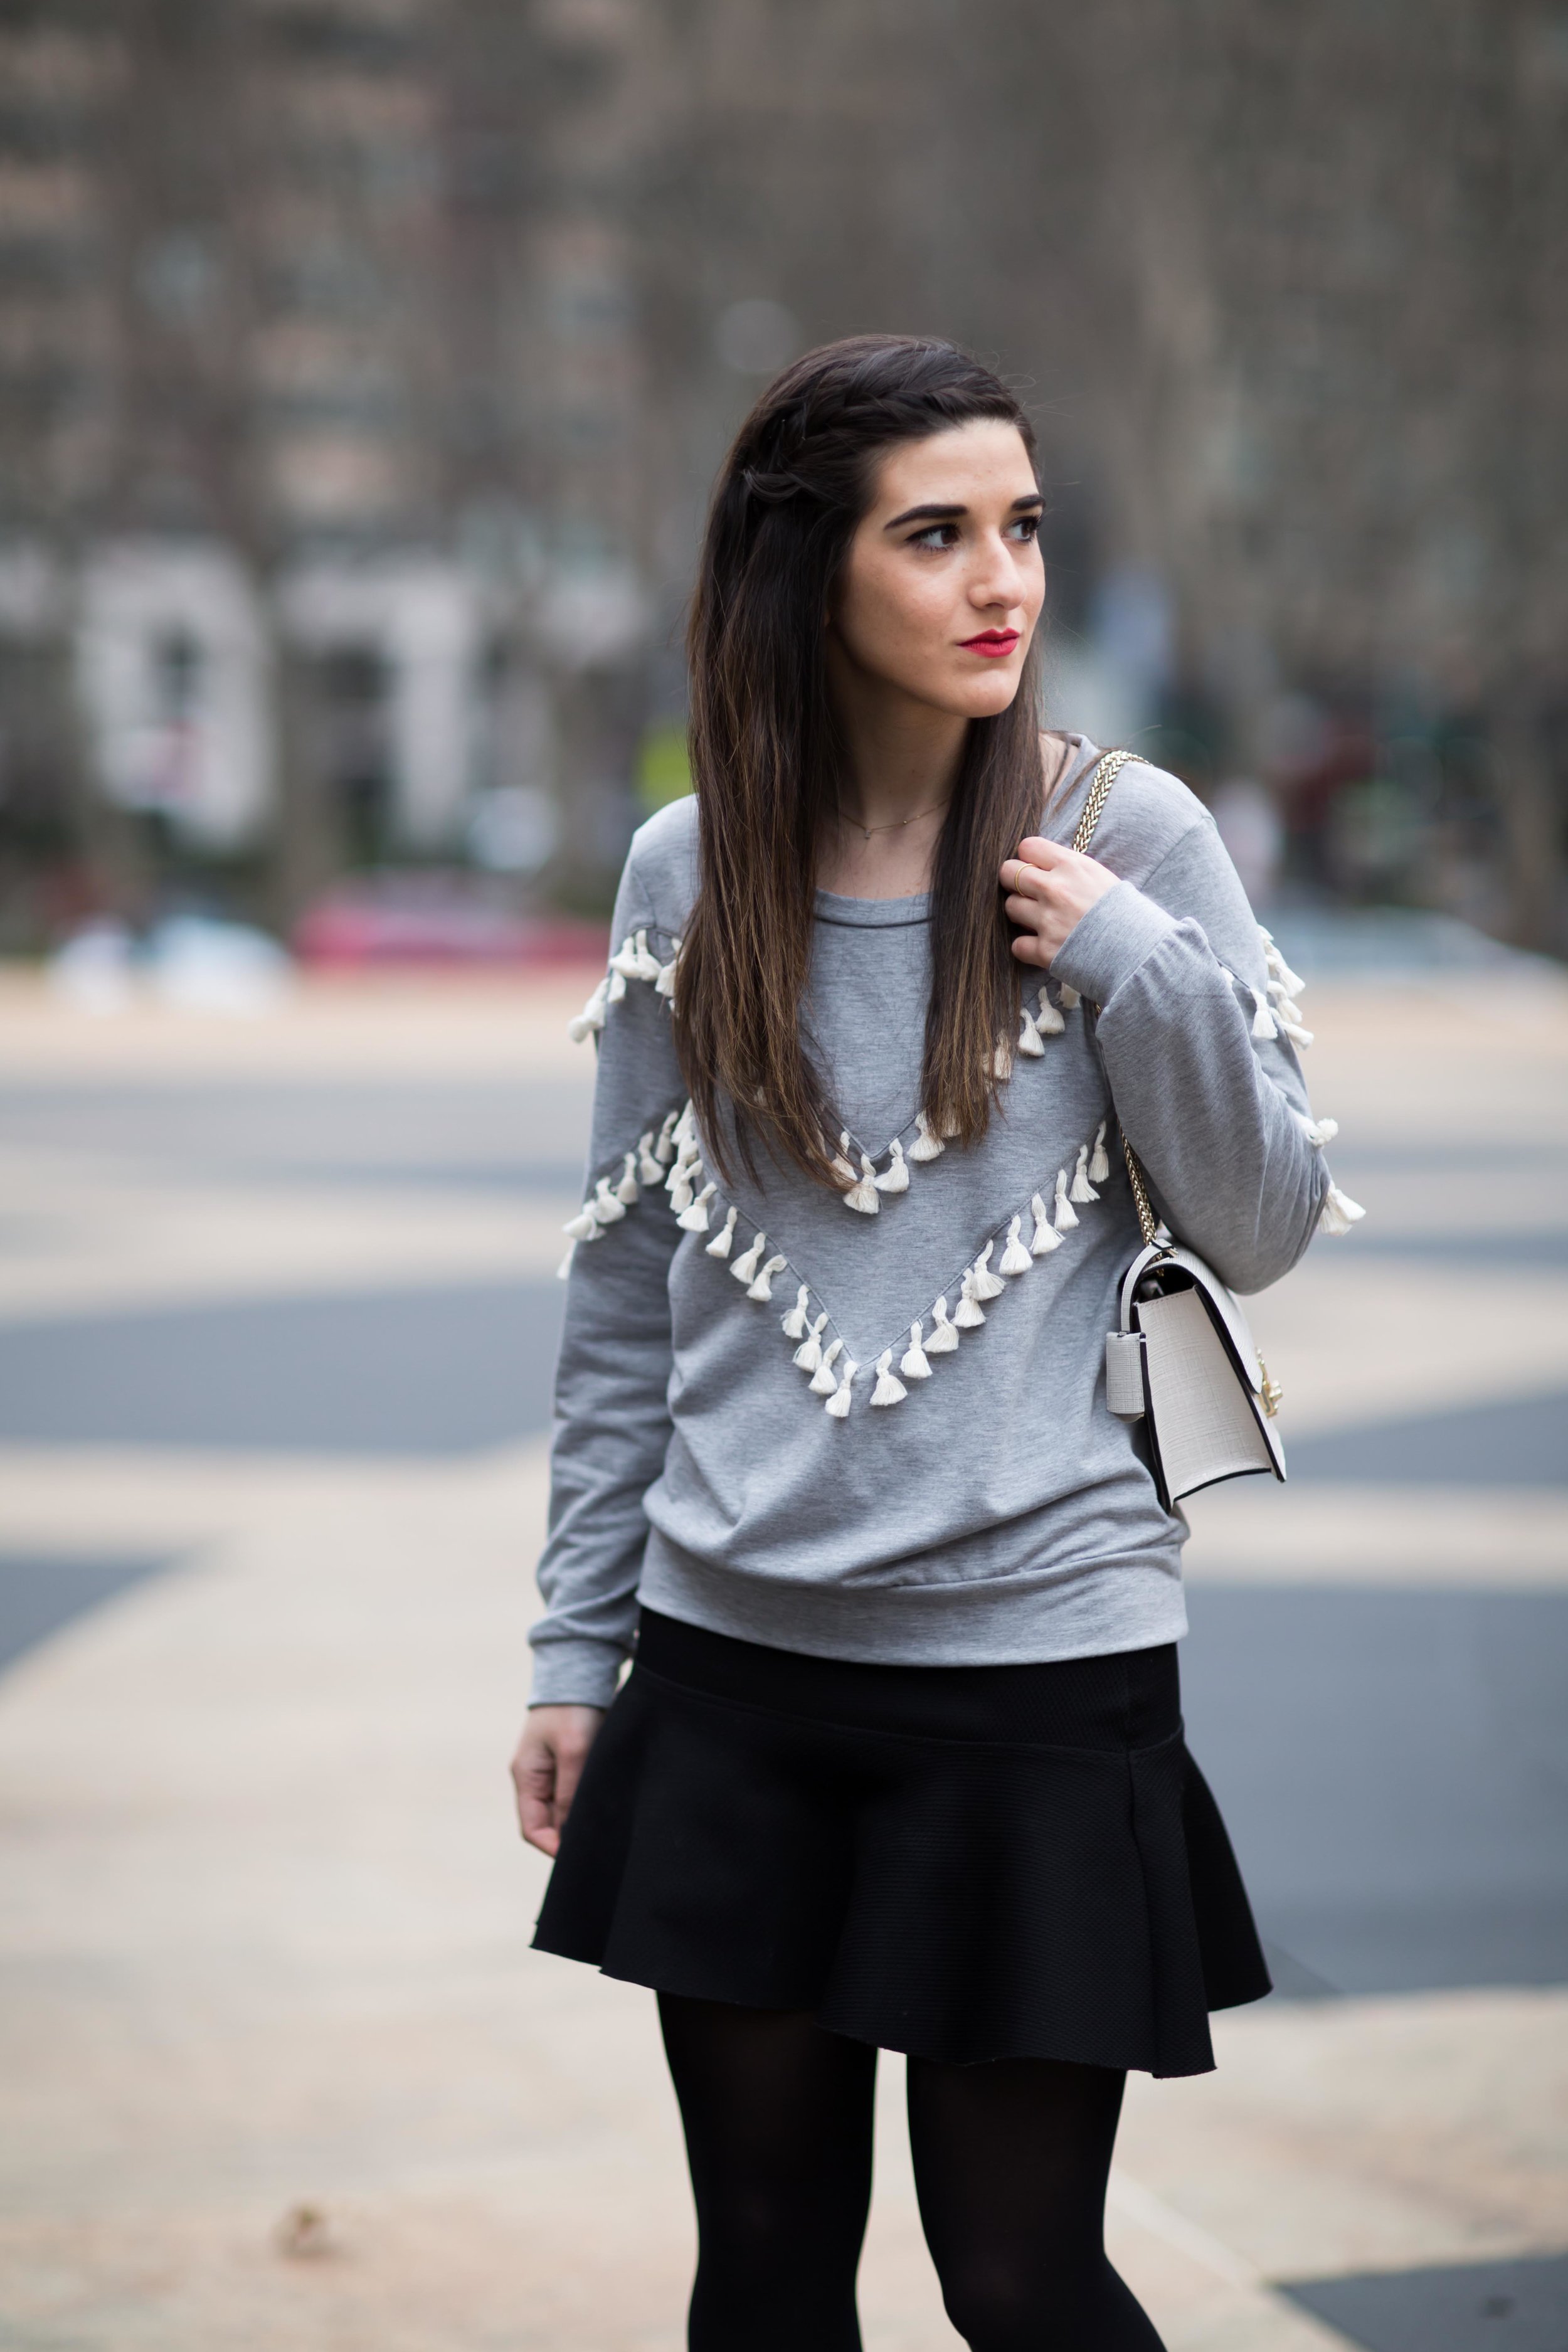 Grey Tassel Sweatshirt Everything You Wanted To Know About Blog Interns Esther Santer Fashion Blog NYC Street Style Blogger Outfit OOTD Trendy Henri Bendel Waldorf Party Bag Black Mini Skirt Booties Shoes Cozy Tights Photoshoot Model  Girl Women Hair.jpg